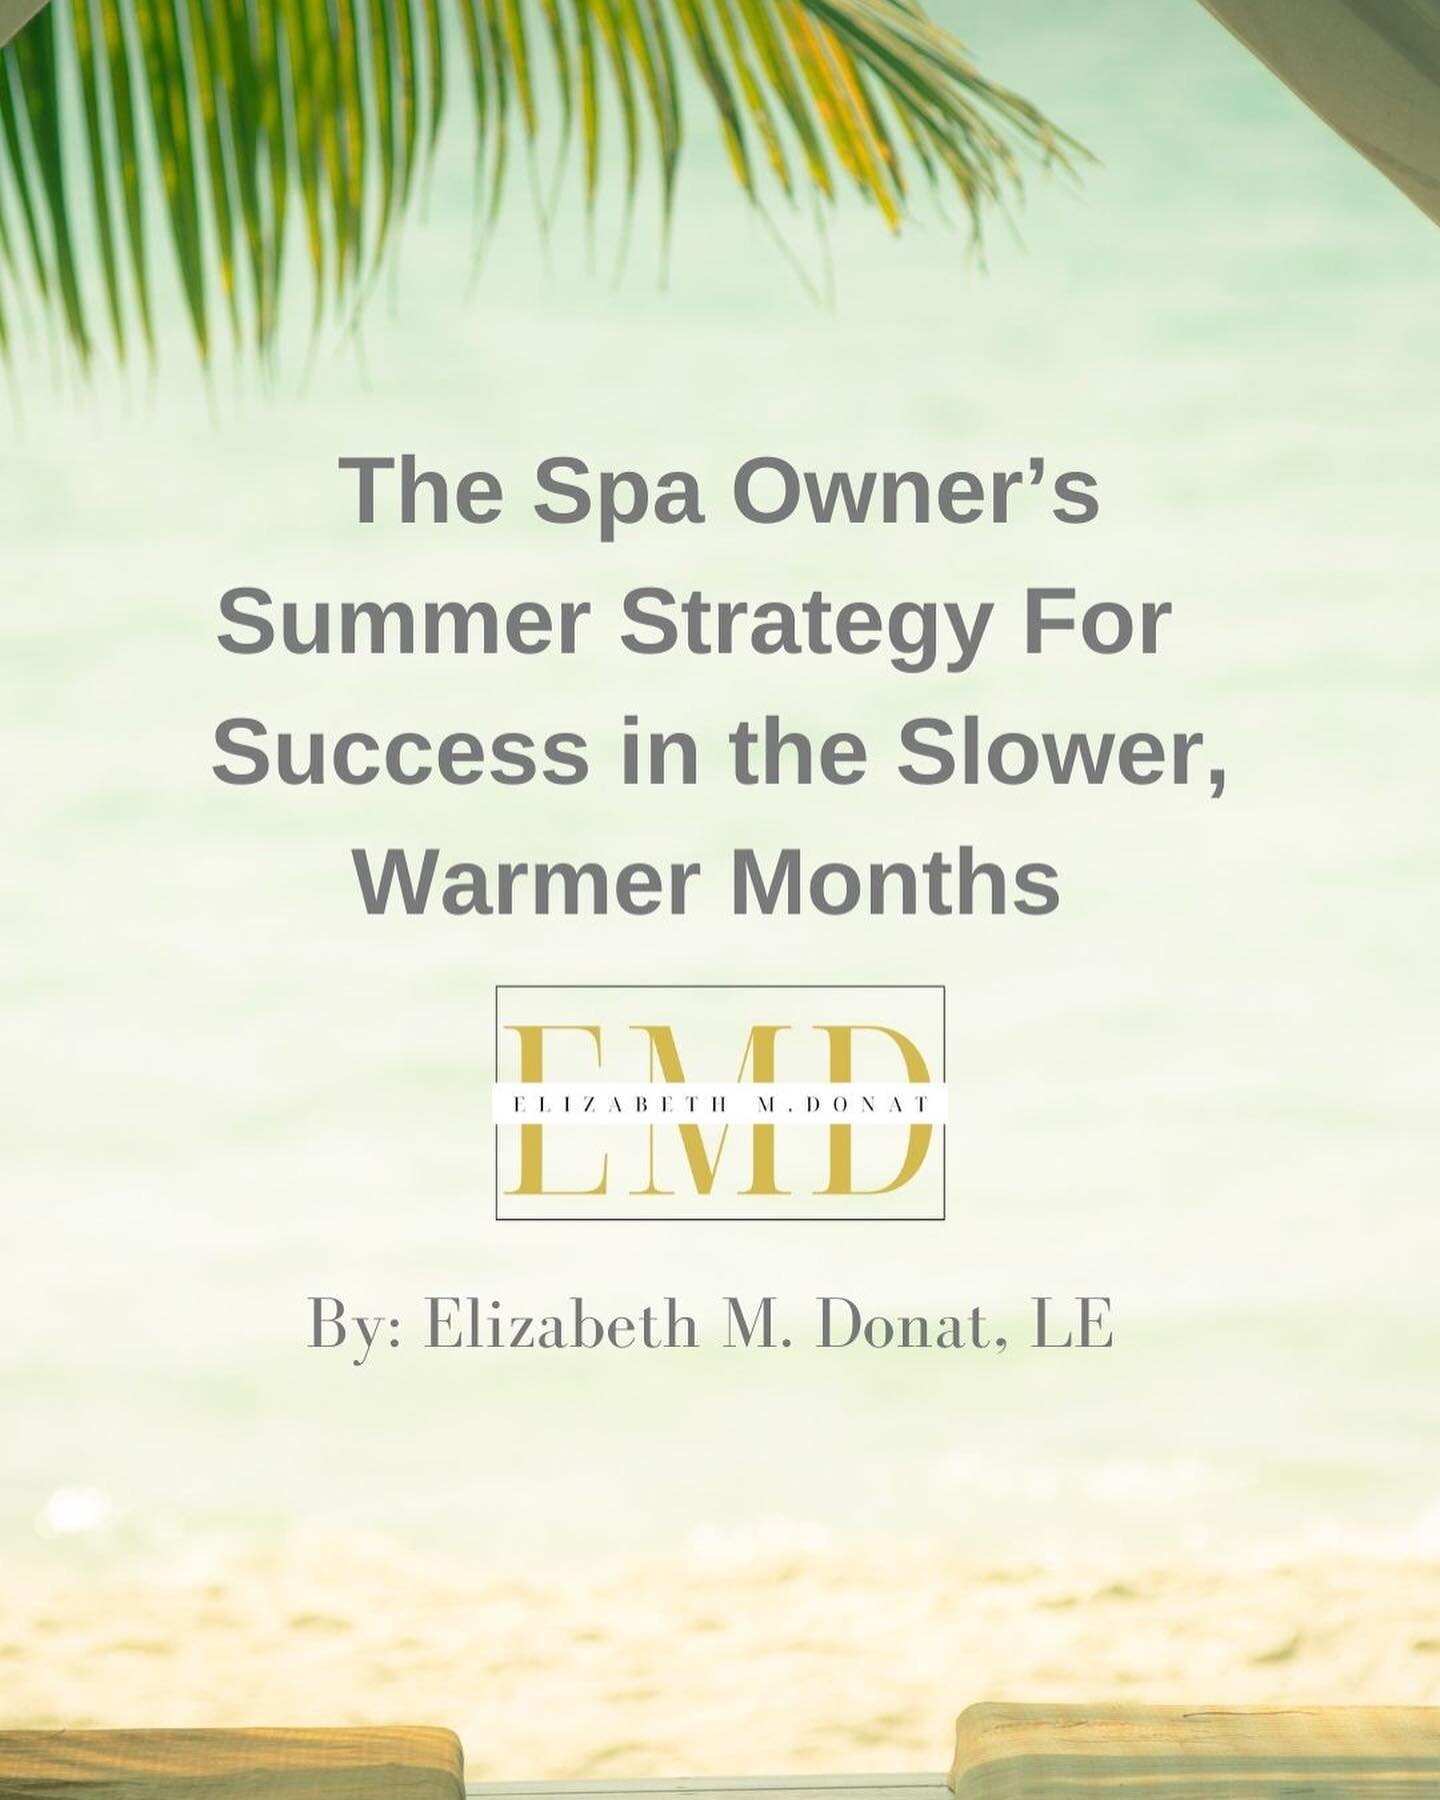 🌞 Summer Strategy for Spa Success! 🌞

Are you a spa or medspa owner ready to conquer the warmer, slower months? 

✅We've got you covered with the ultimate summer strategy to overcome common challenges. 

➡️Scroll through to discover solutions to yo